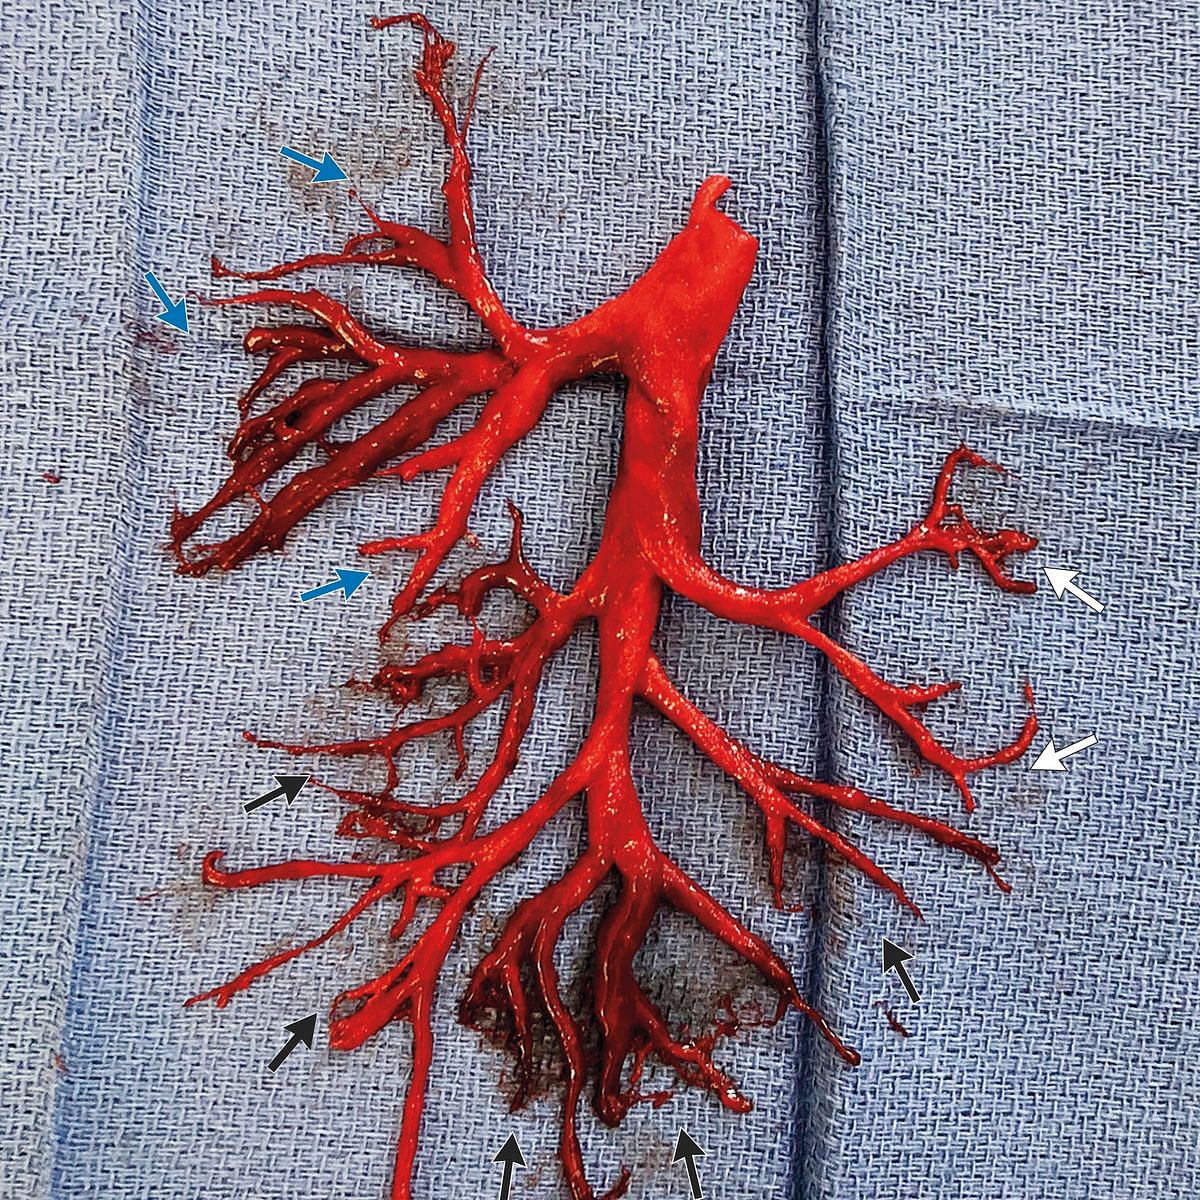 A 36-year-old man suffering from chronic heart disease failure, coughed up a part of his lung in a coughing fit.